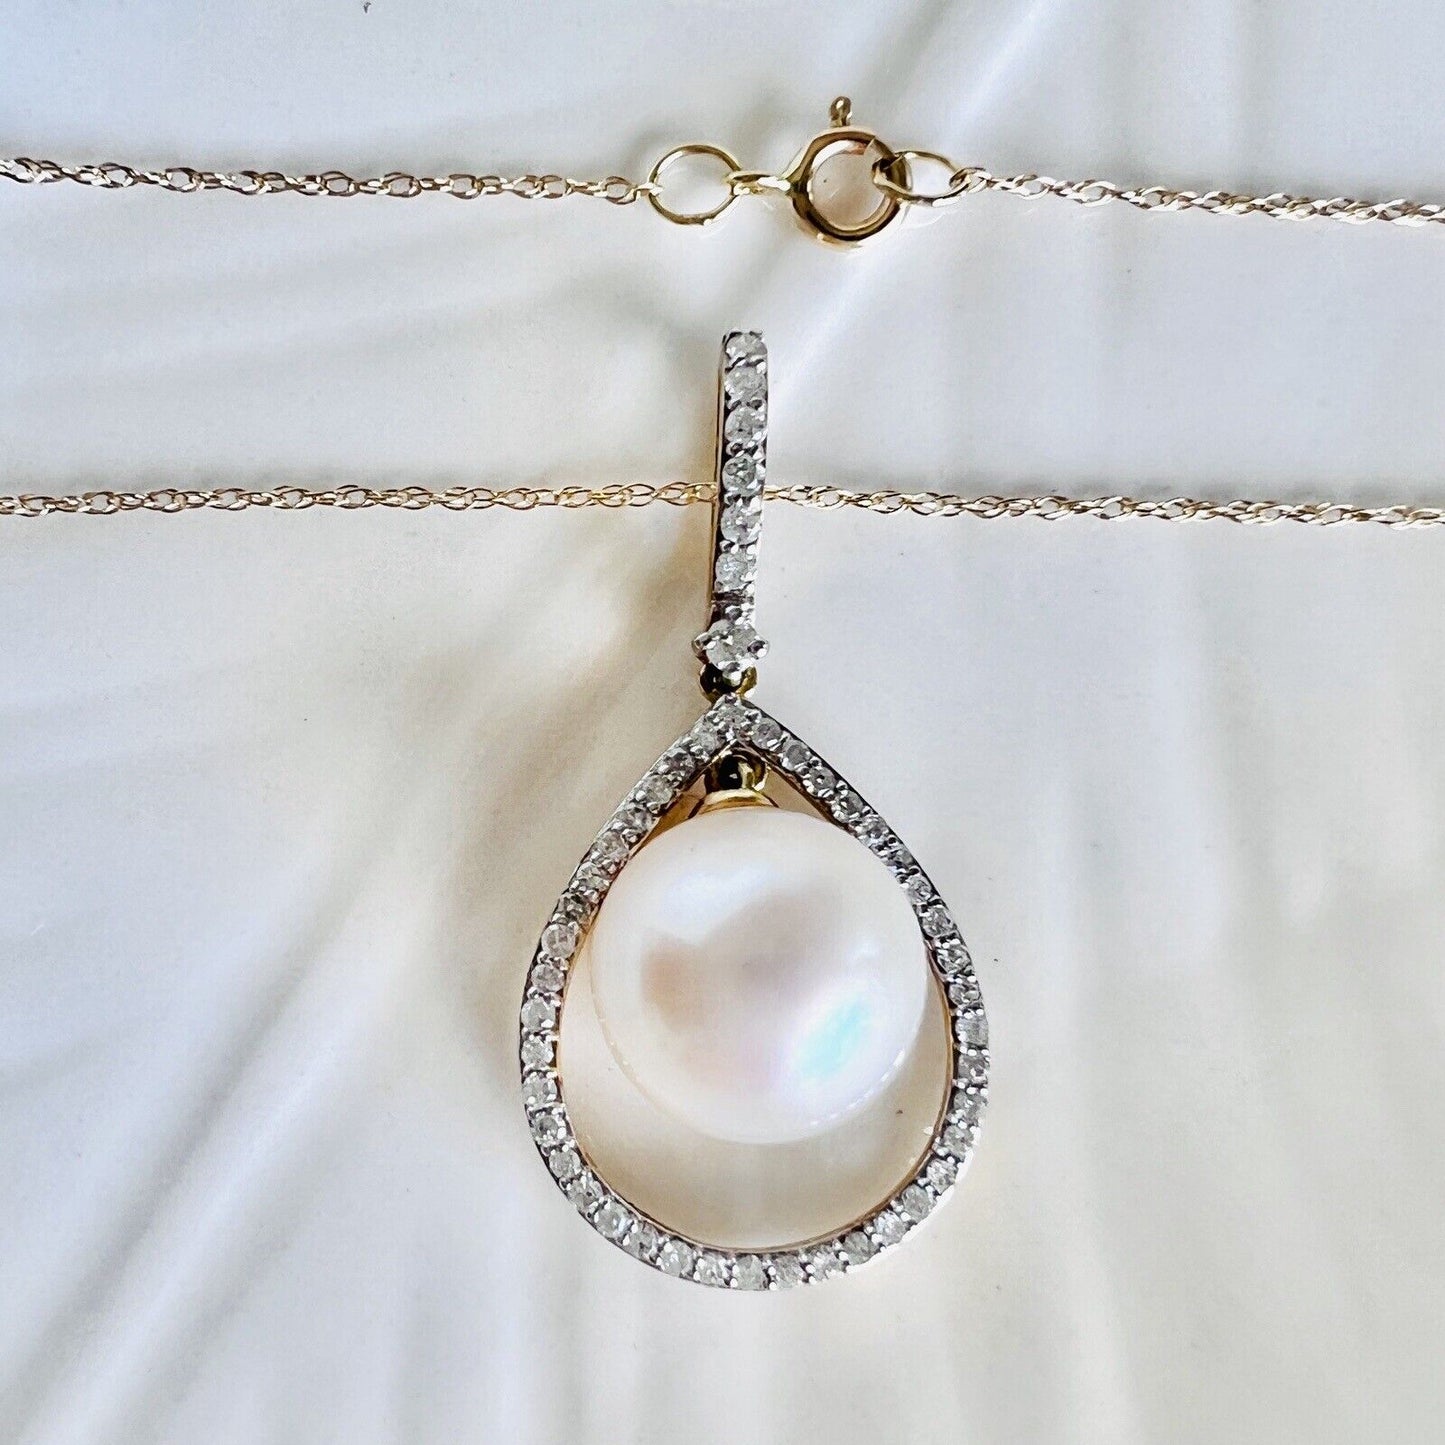 Solid 14k Yellow Gold Genuine Pearl and Diamond Drop Pendant Necklace, New 18”